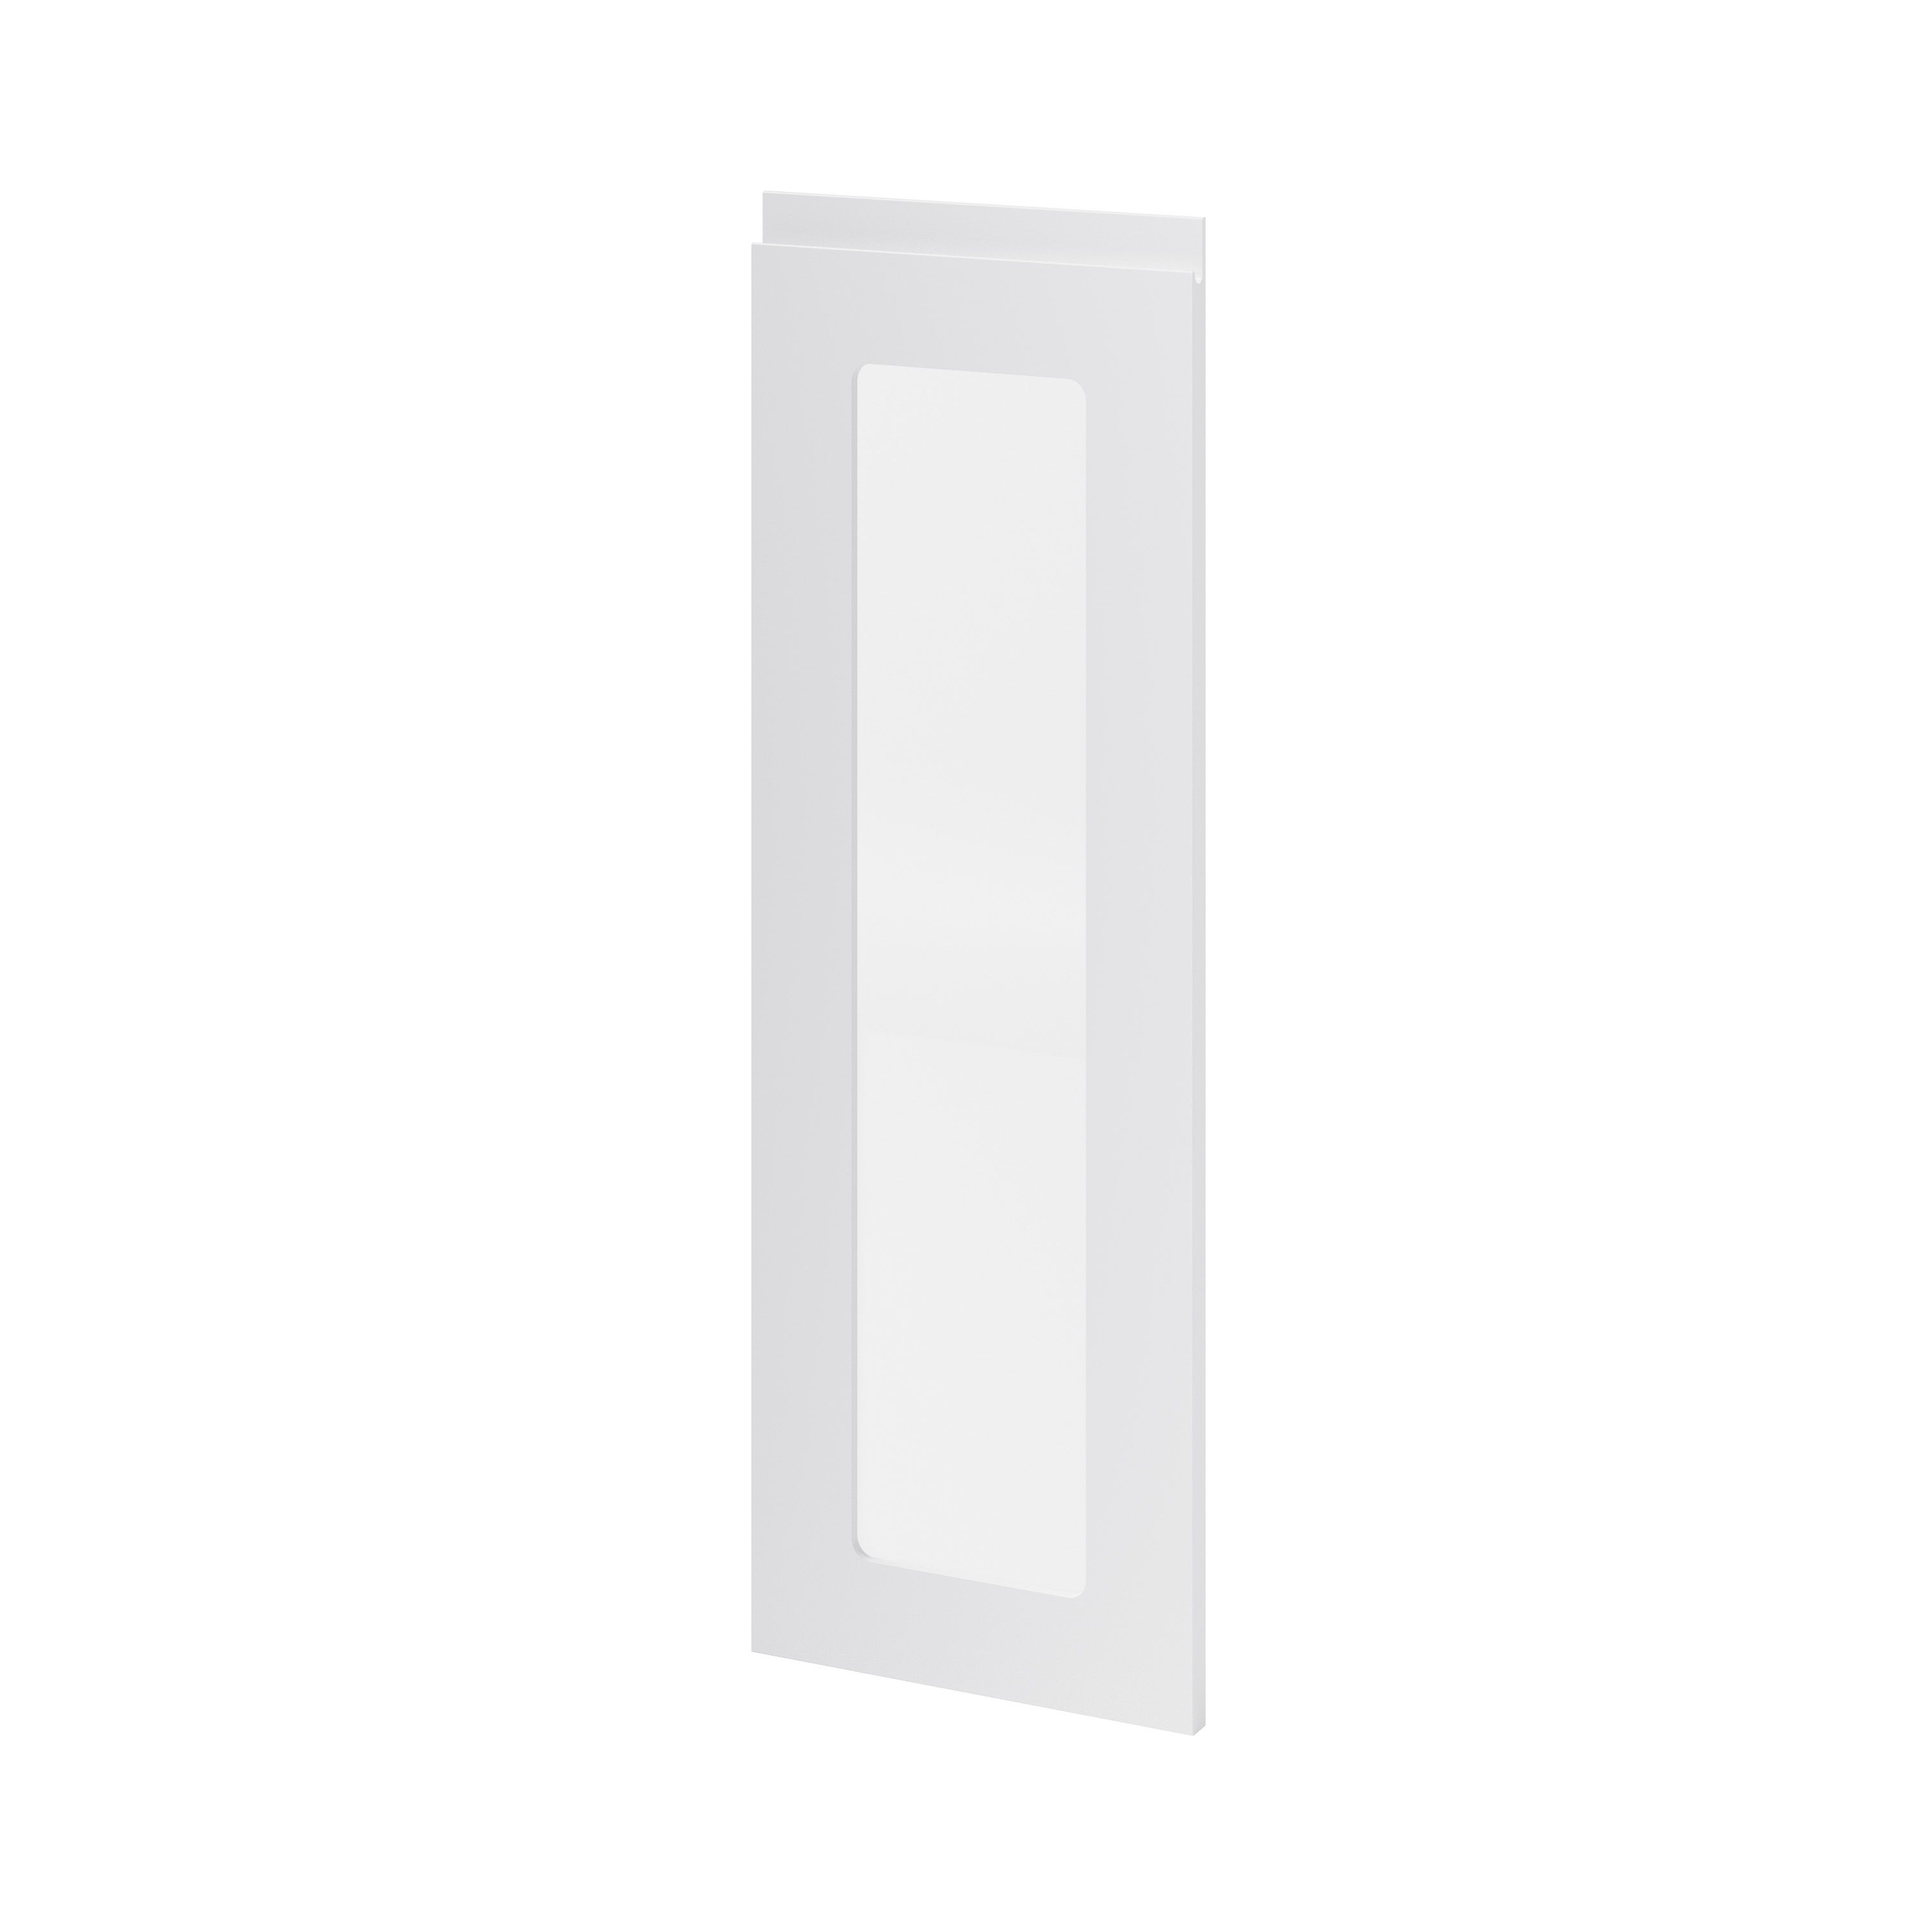 GoodHome Garcinia Gloss light grey integrated handle Tall glazed Cabinet door (W)300mm (H)895mm (T)19mm